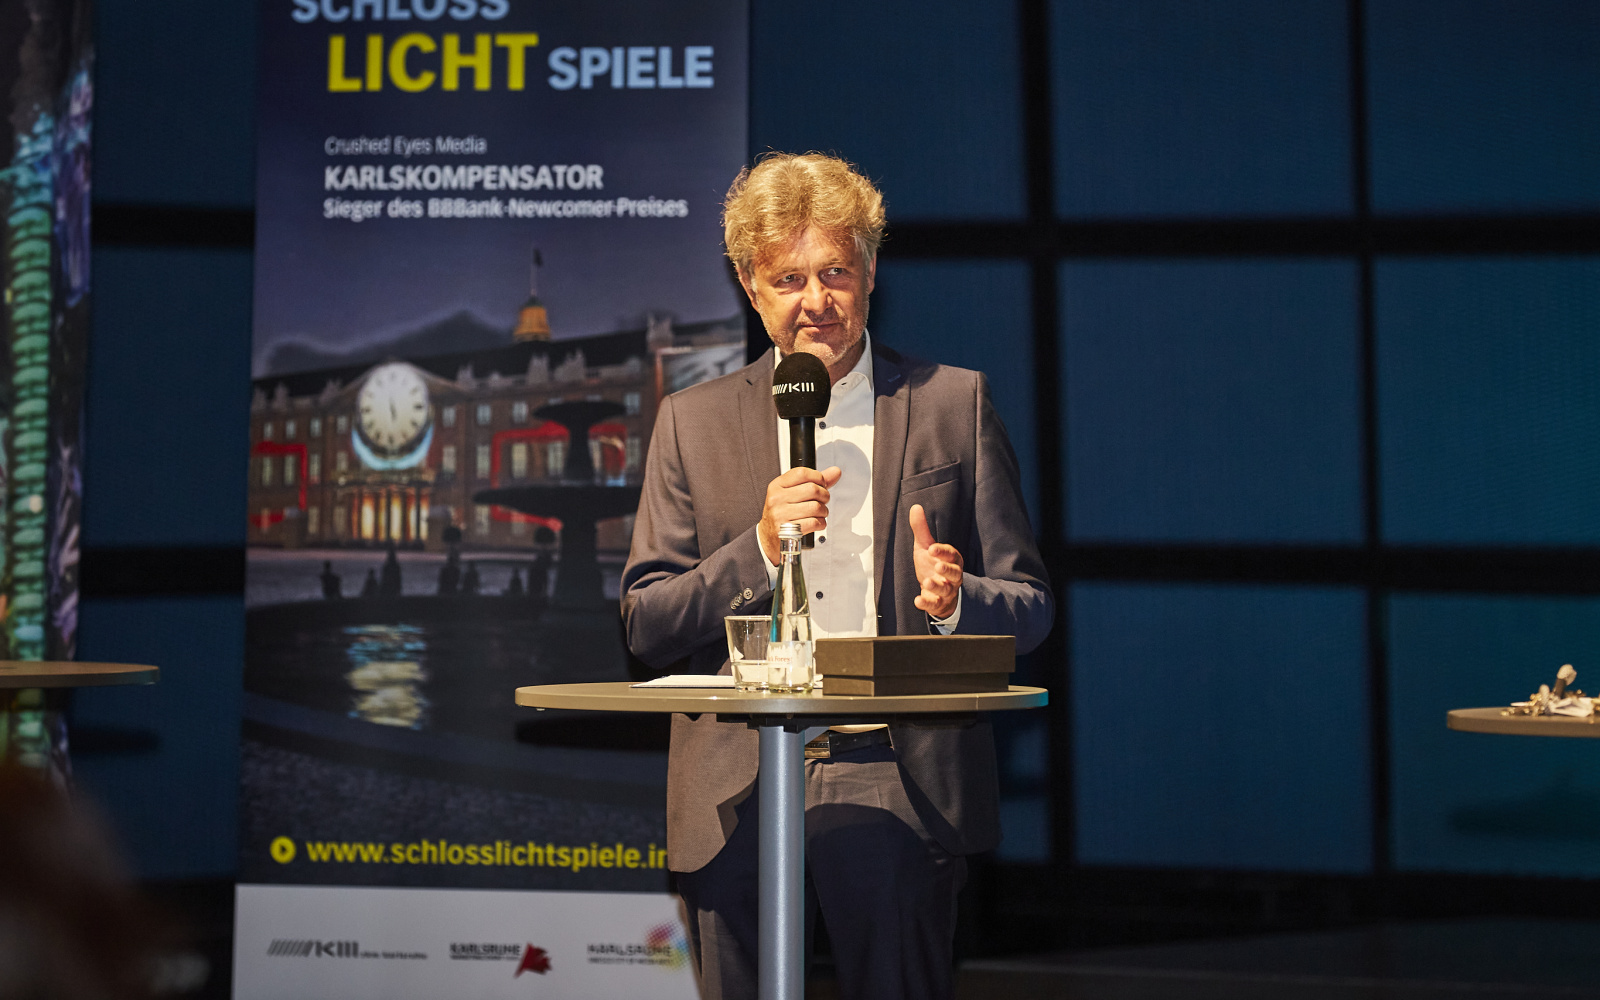 The press conference of the Schlosslichtspiele 2021 in the media theater of the ZKM. Lord Mayor Dr. Frank Mentrup speaks into a microphone.